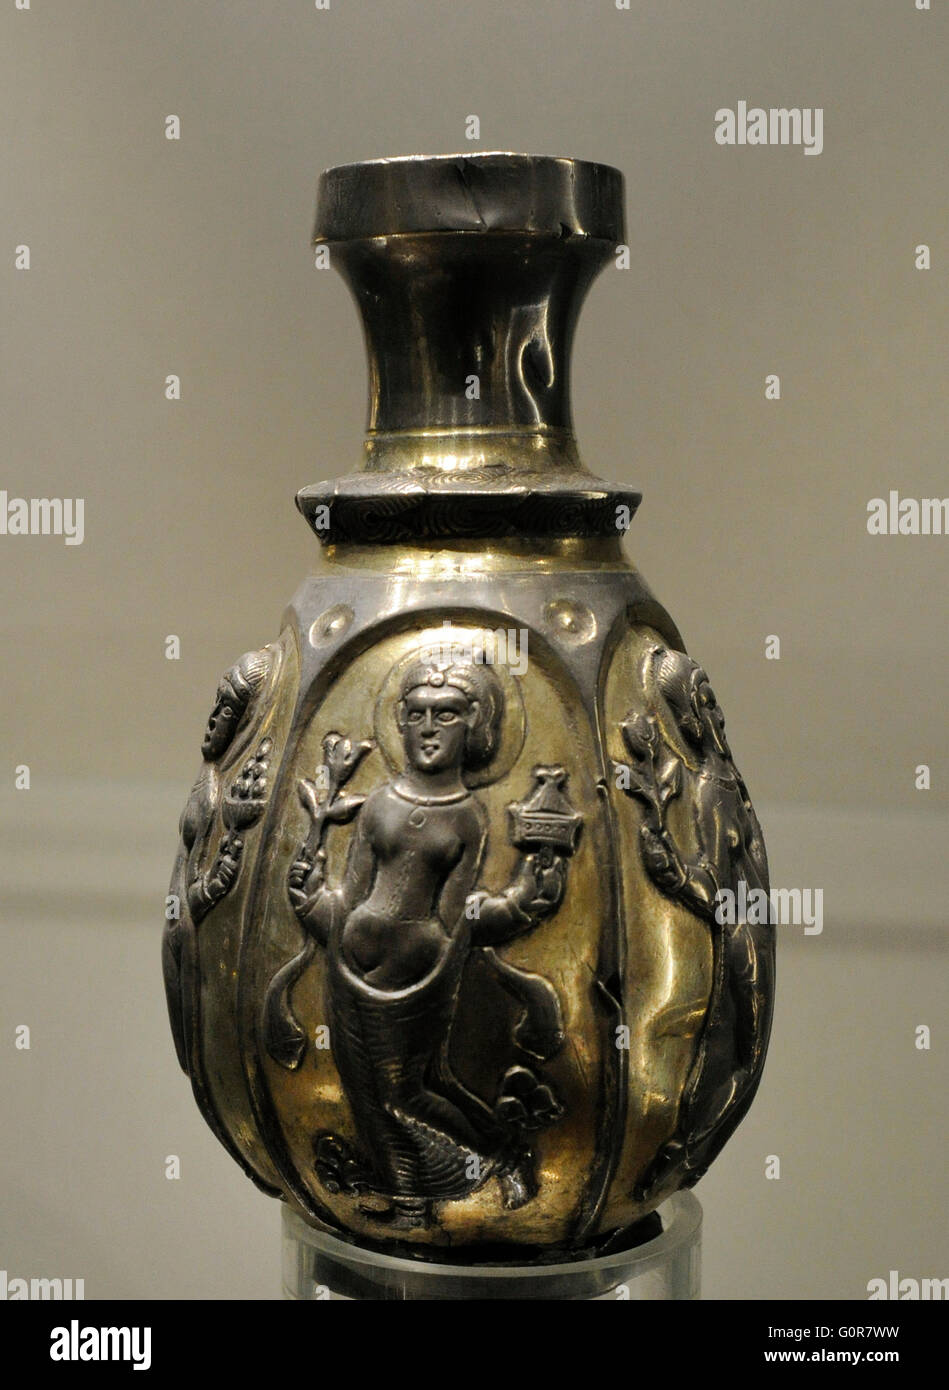 Sasanian art. Vase with female figures. Silver; chasing, gilding. Iran. 6th-7th centuries. The State Hermitage Museum. Saint Petersburg. Russia. Stock Photo